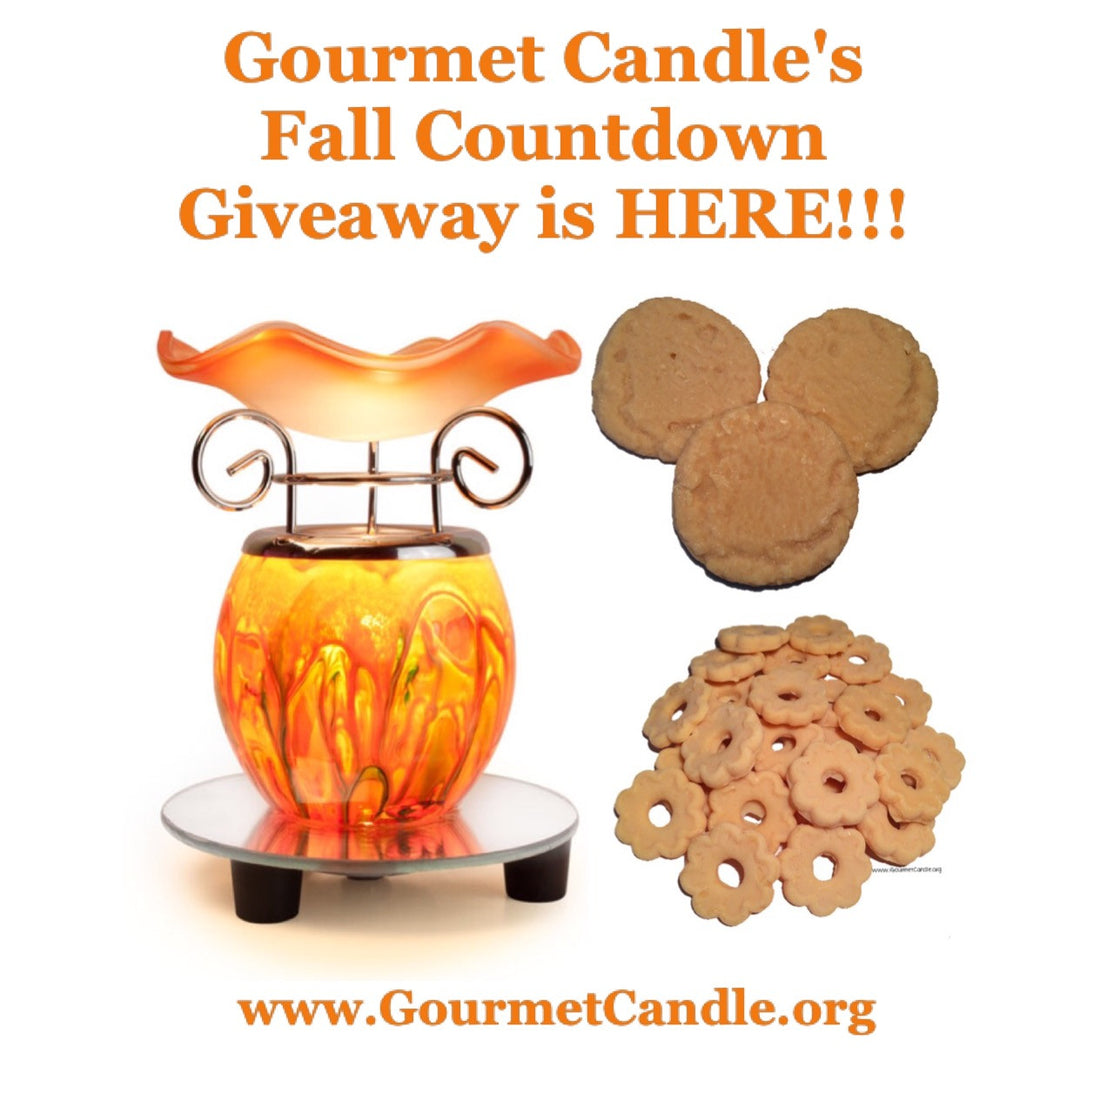 Gourmet Candle's Pre Fall Giveaway is HERE!!!!